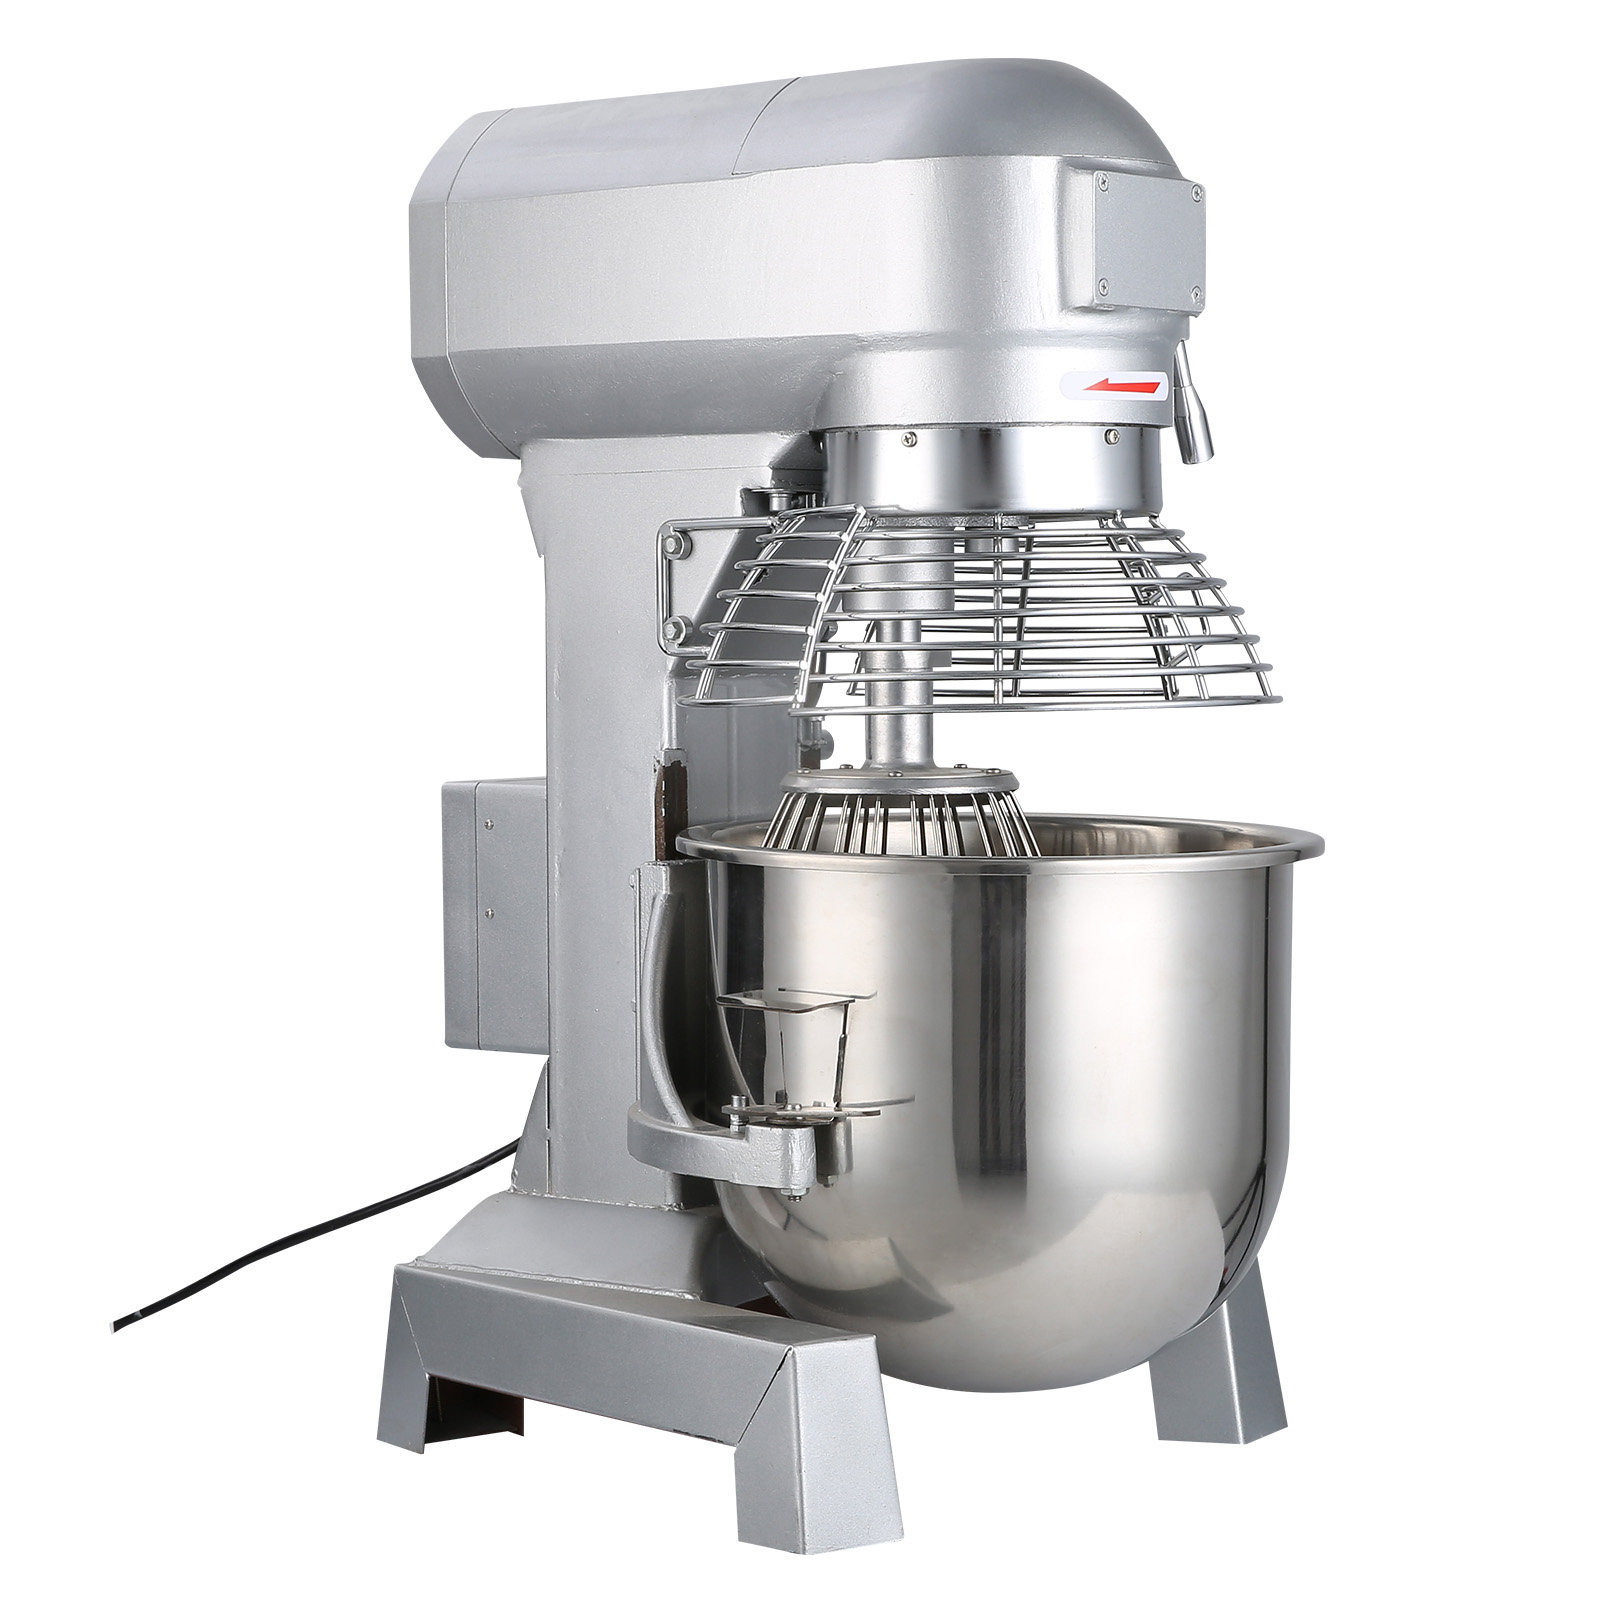 VEVOR Commercial Stand Mixer 20 qt. 2 in 1 Multifunctional Silver